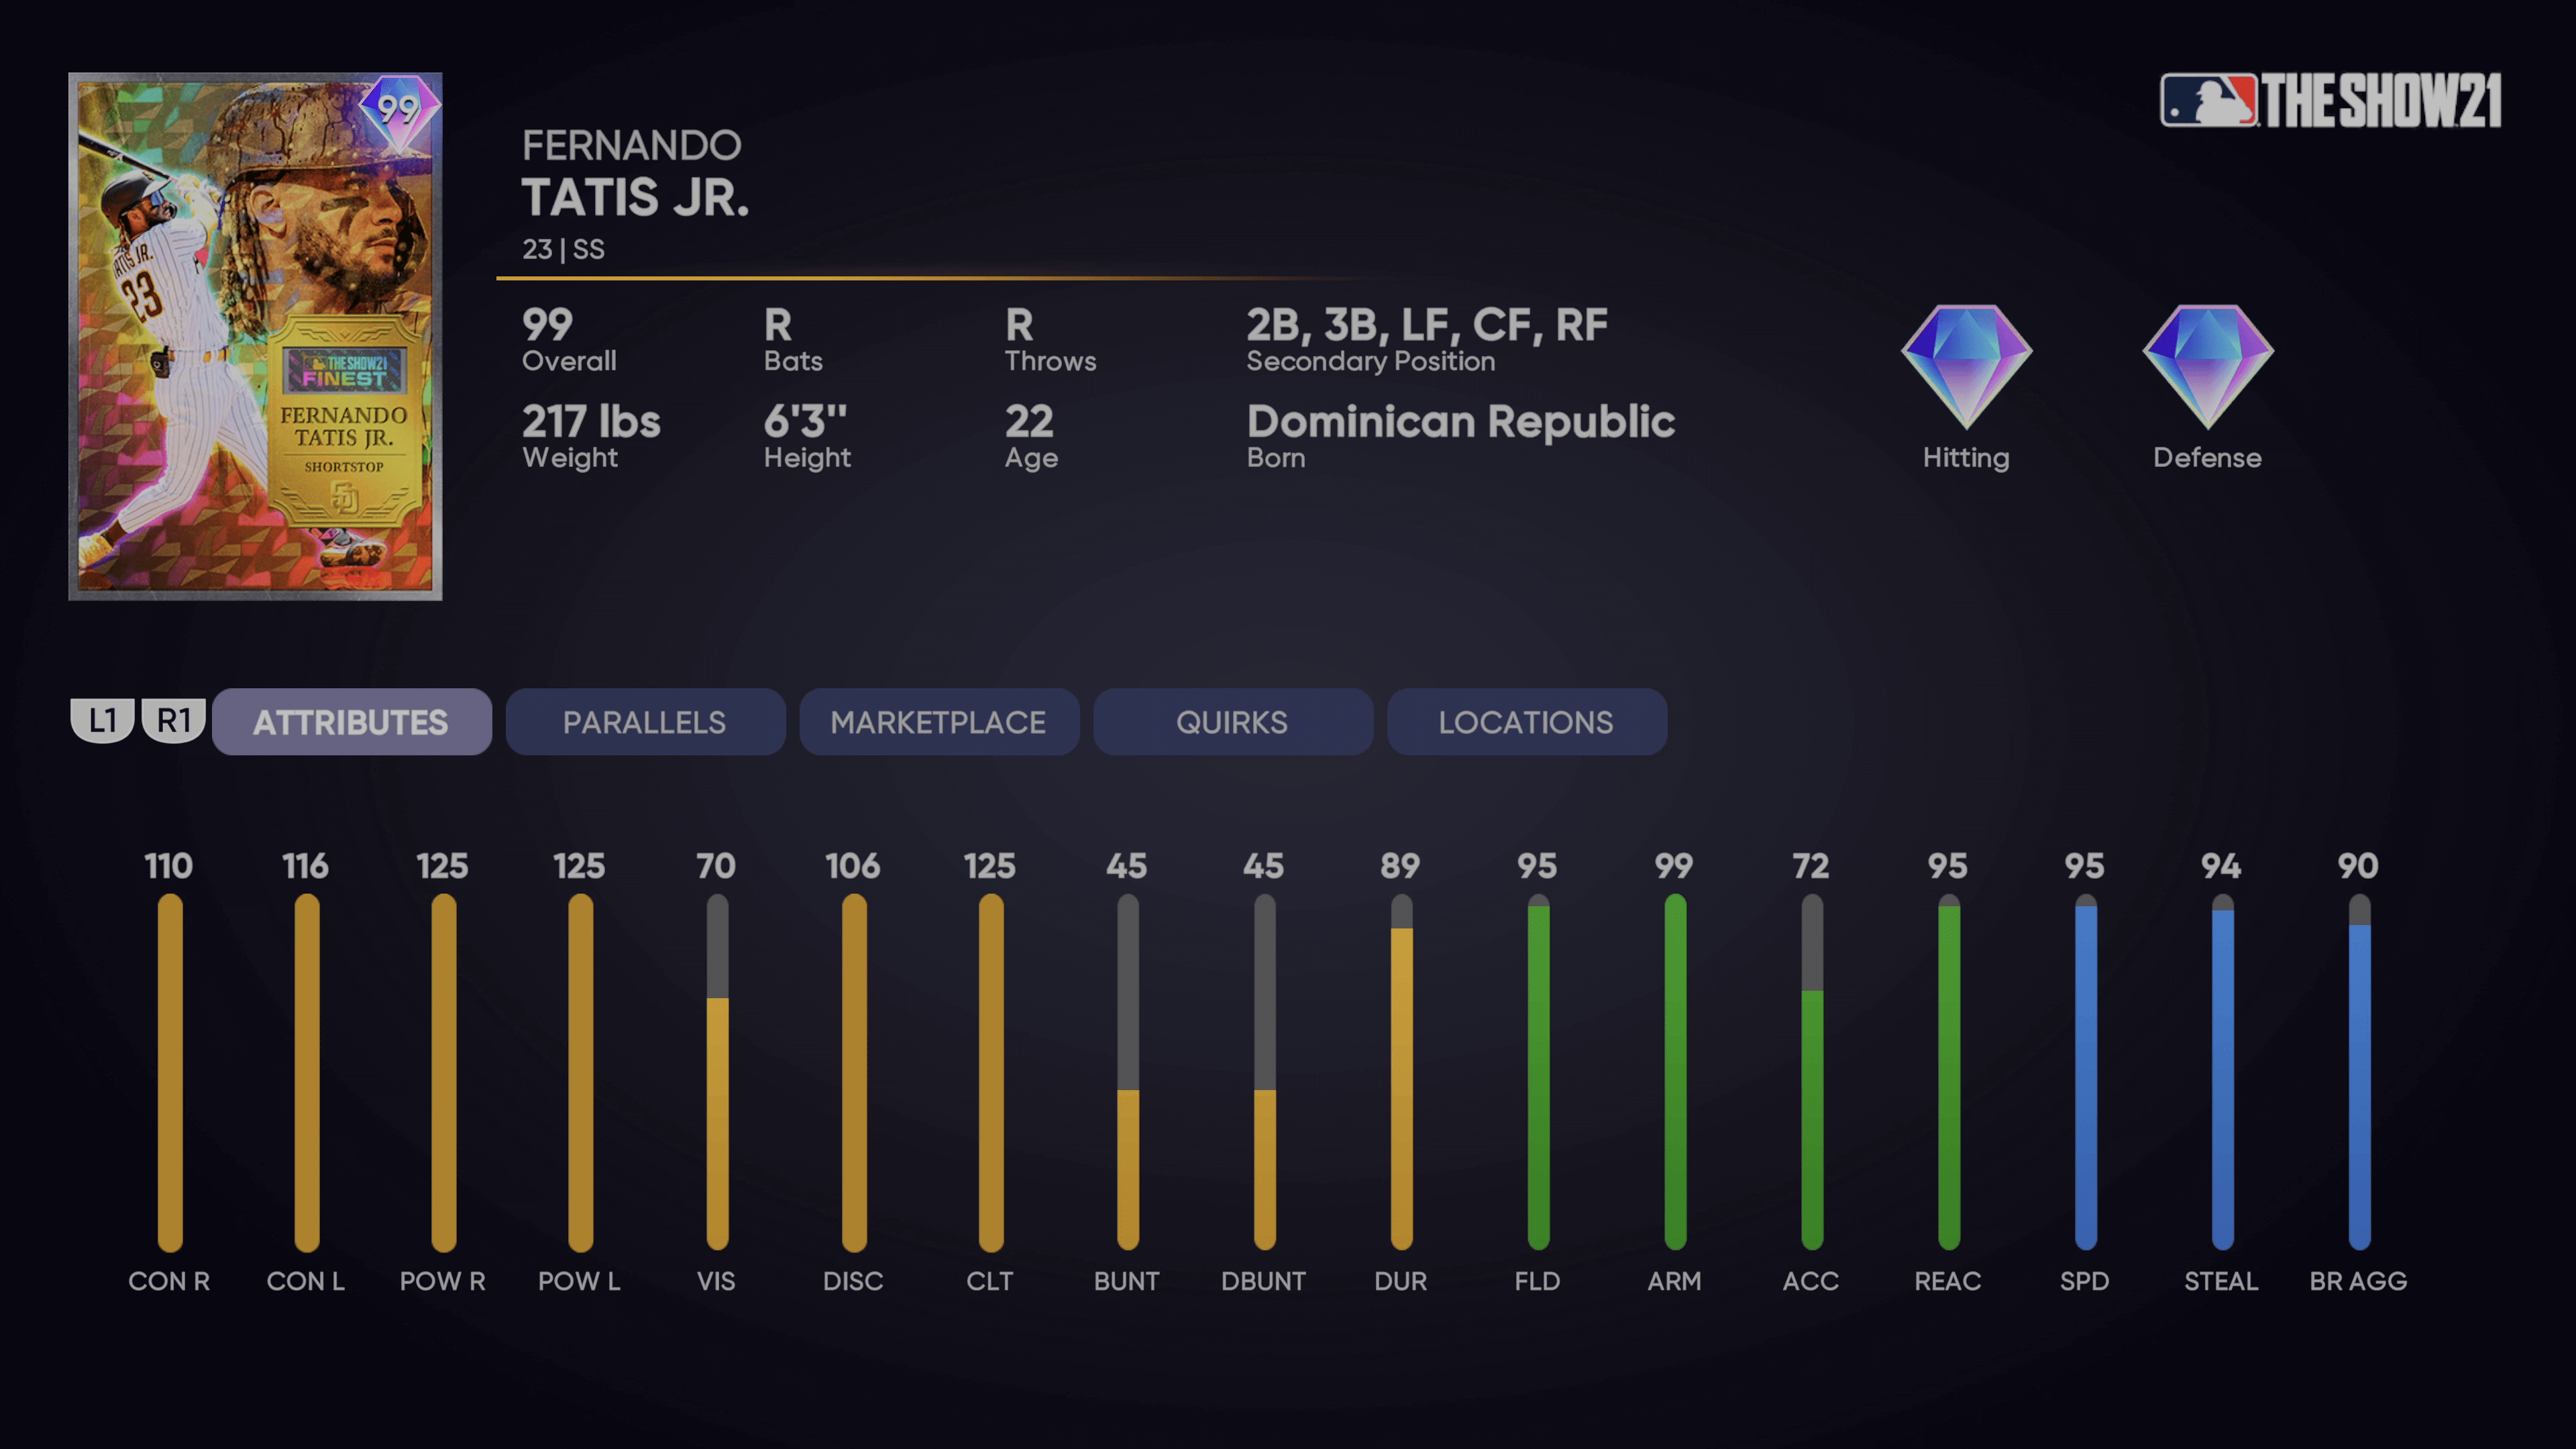 MLB The Show 21 - Team Affinity 5 Program and Players